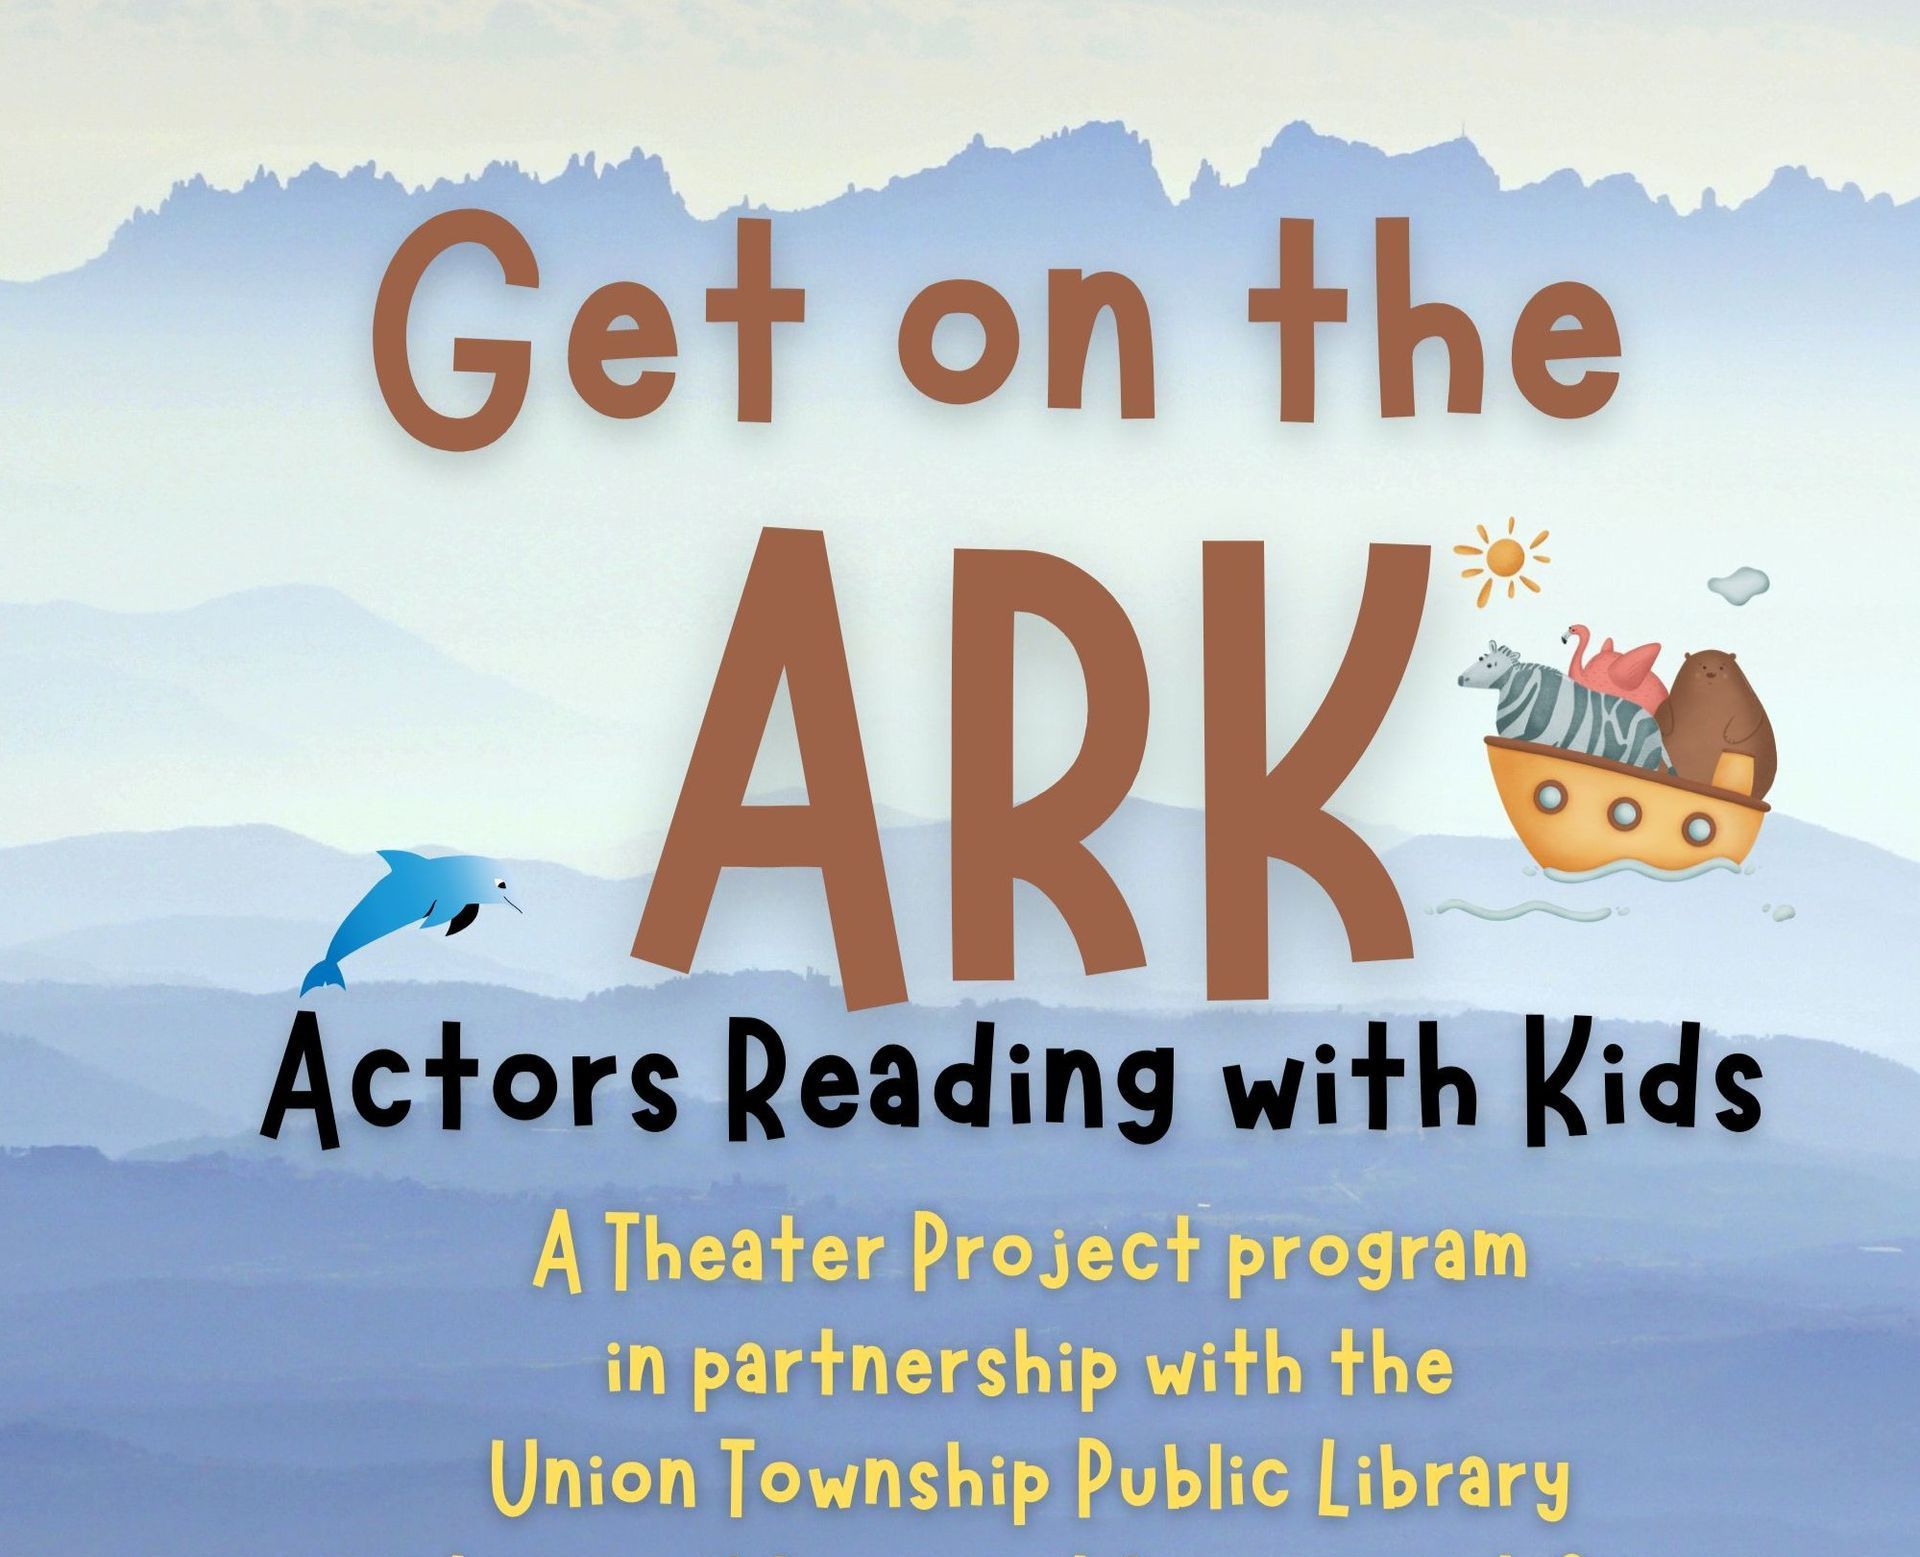 Get on the Ark. Actors reading with kids.